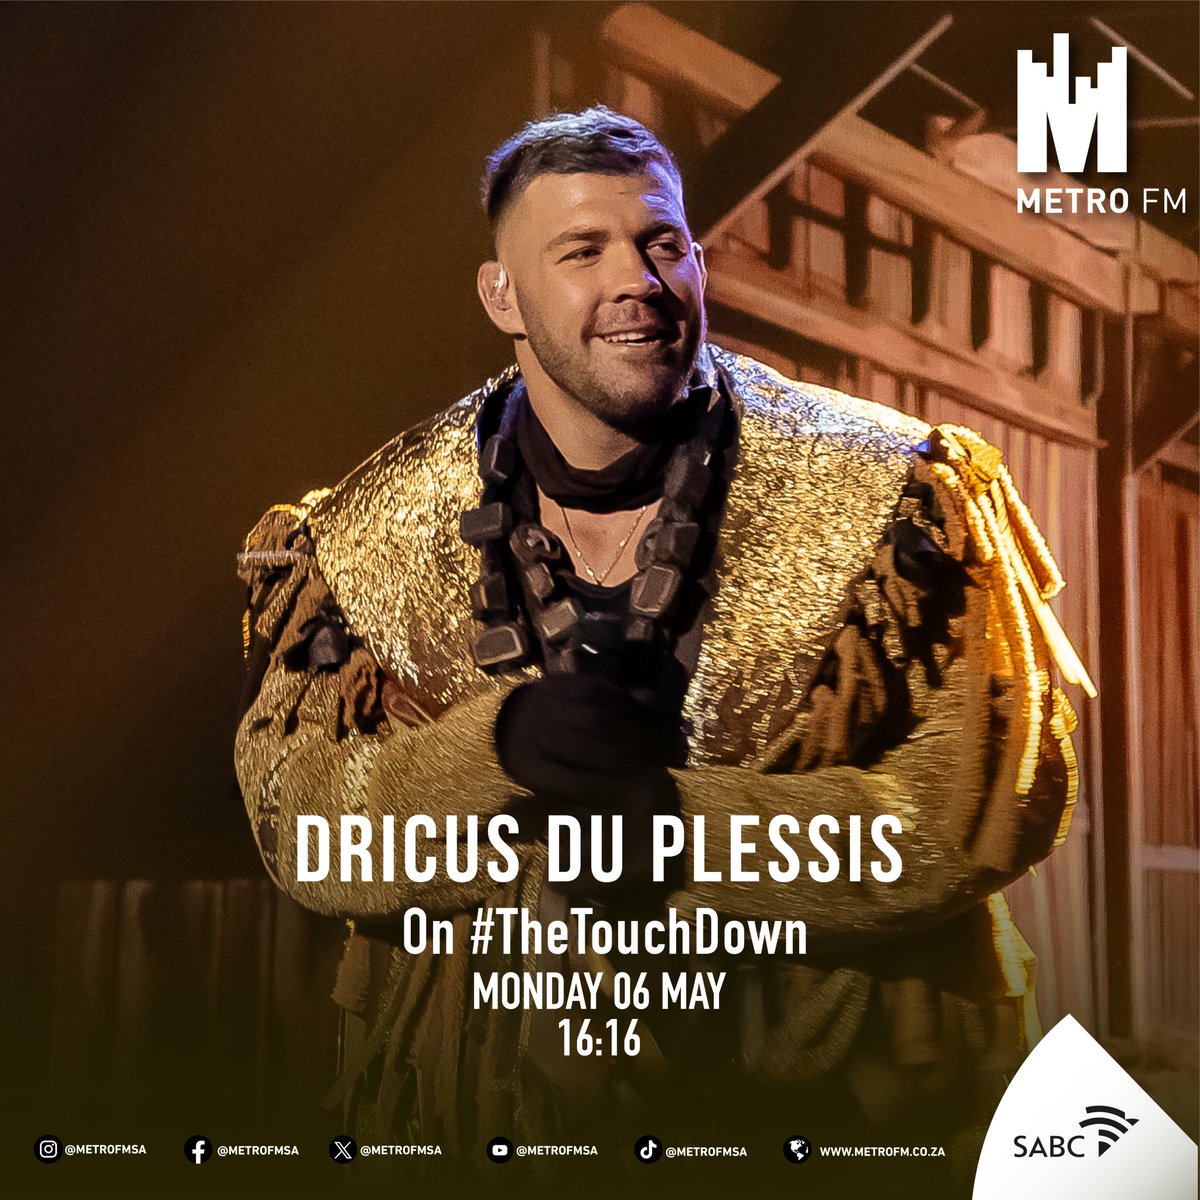 We catch up with UFC world champ @dricusduplessis at 16:16 to chat all things @MaskedSingerZA @SABC3 #TheTouchdown